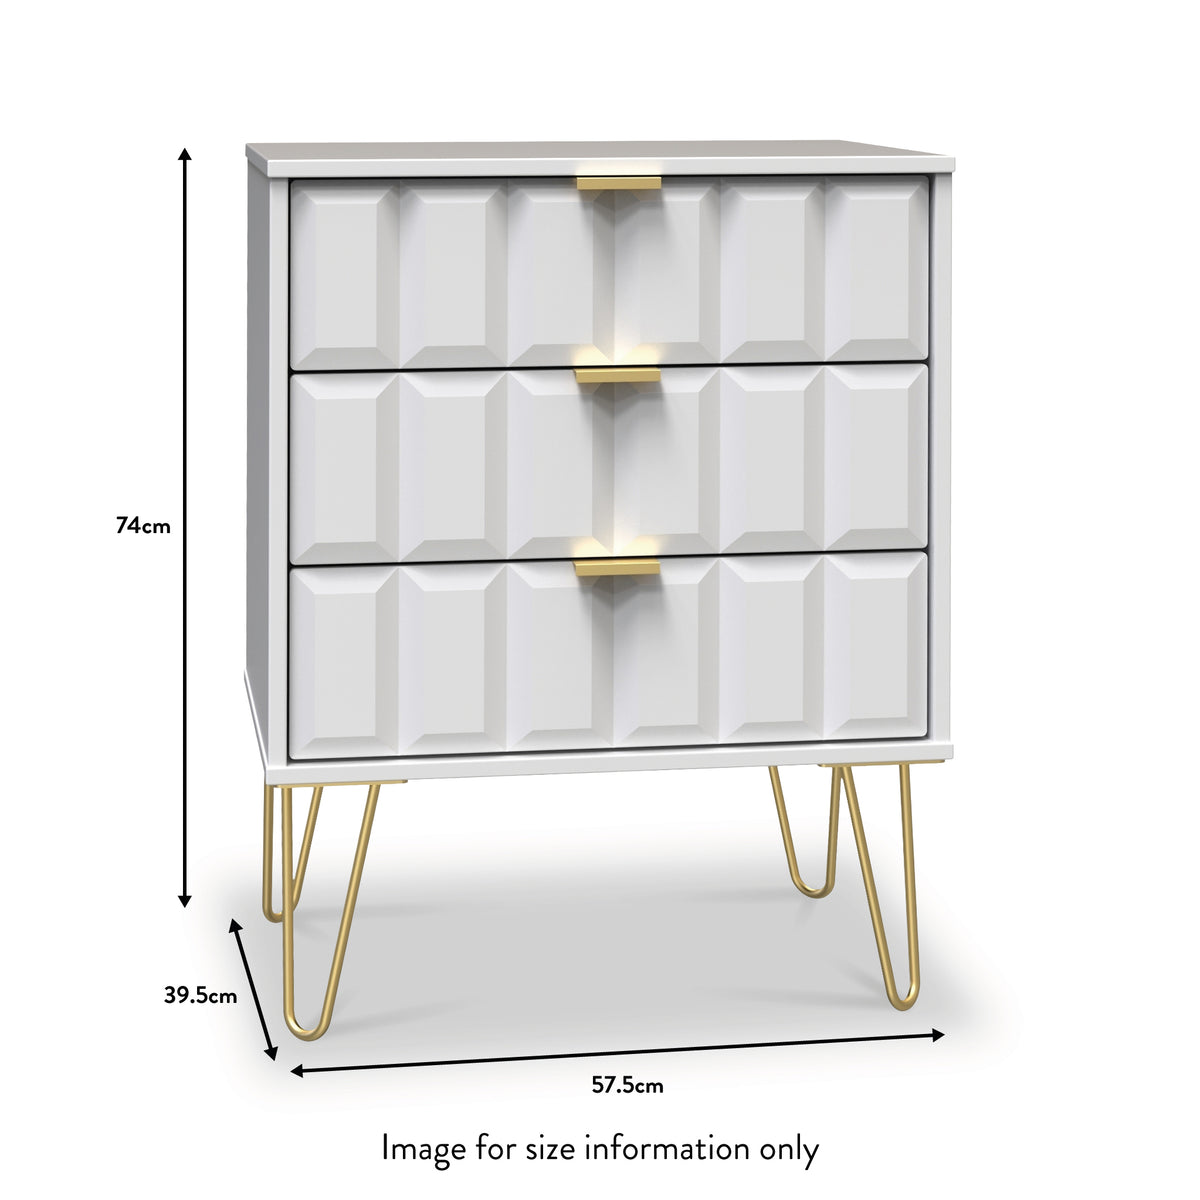 Harlow White 3 Drawer Midi Sideboard with Gold Hairpin Legs dimensions